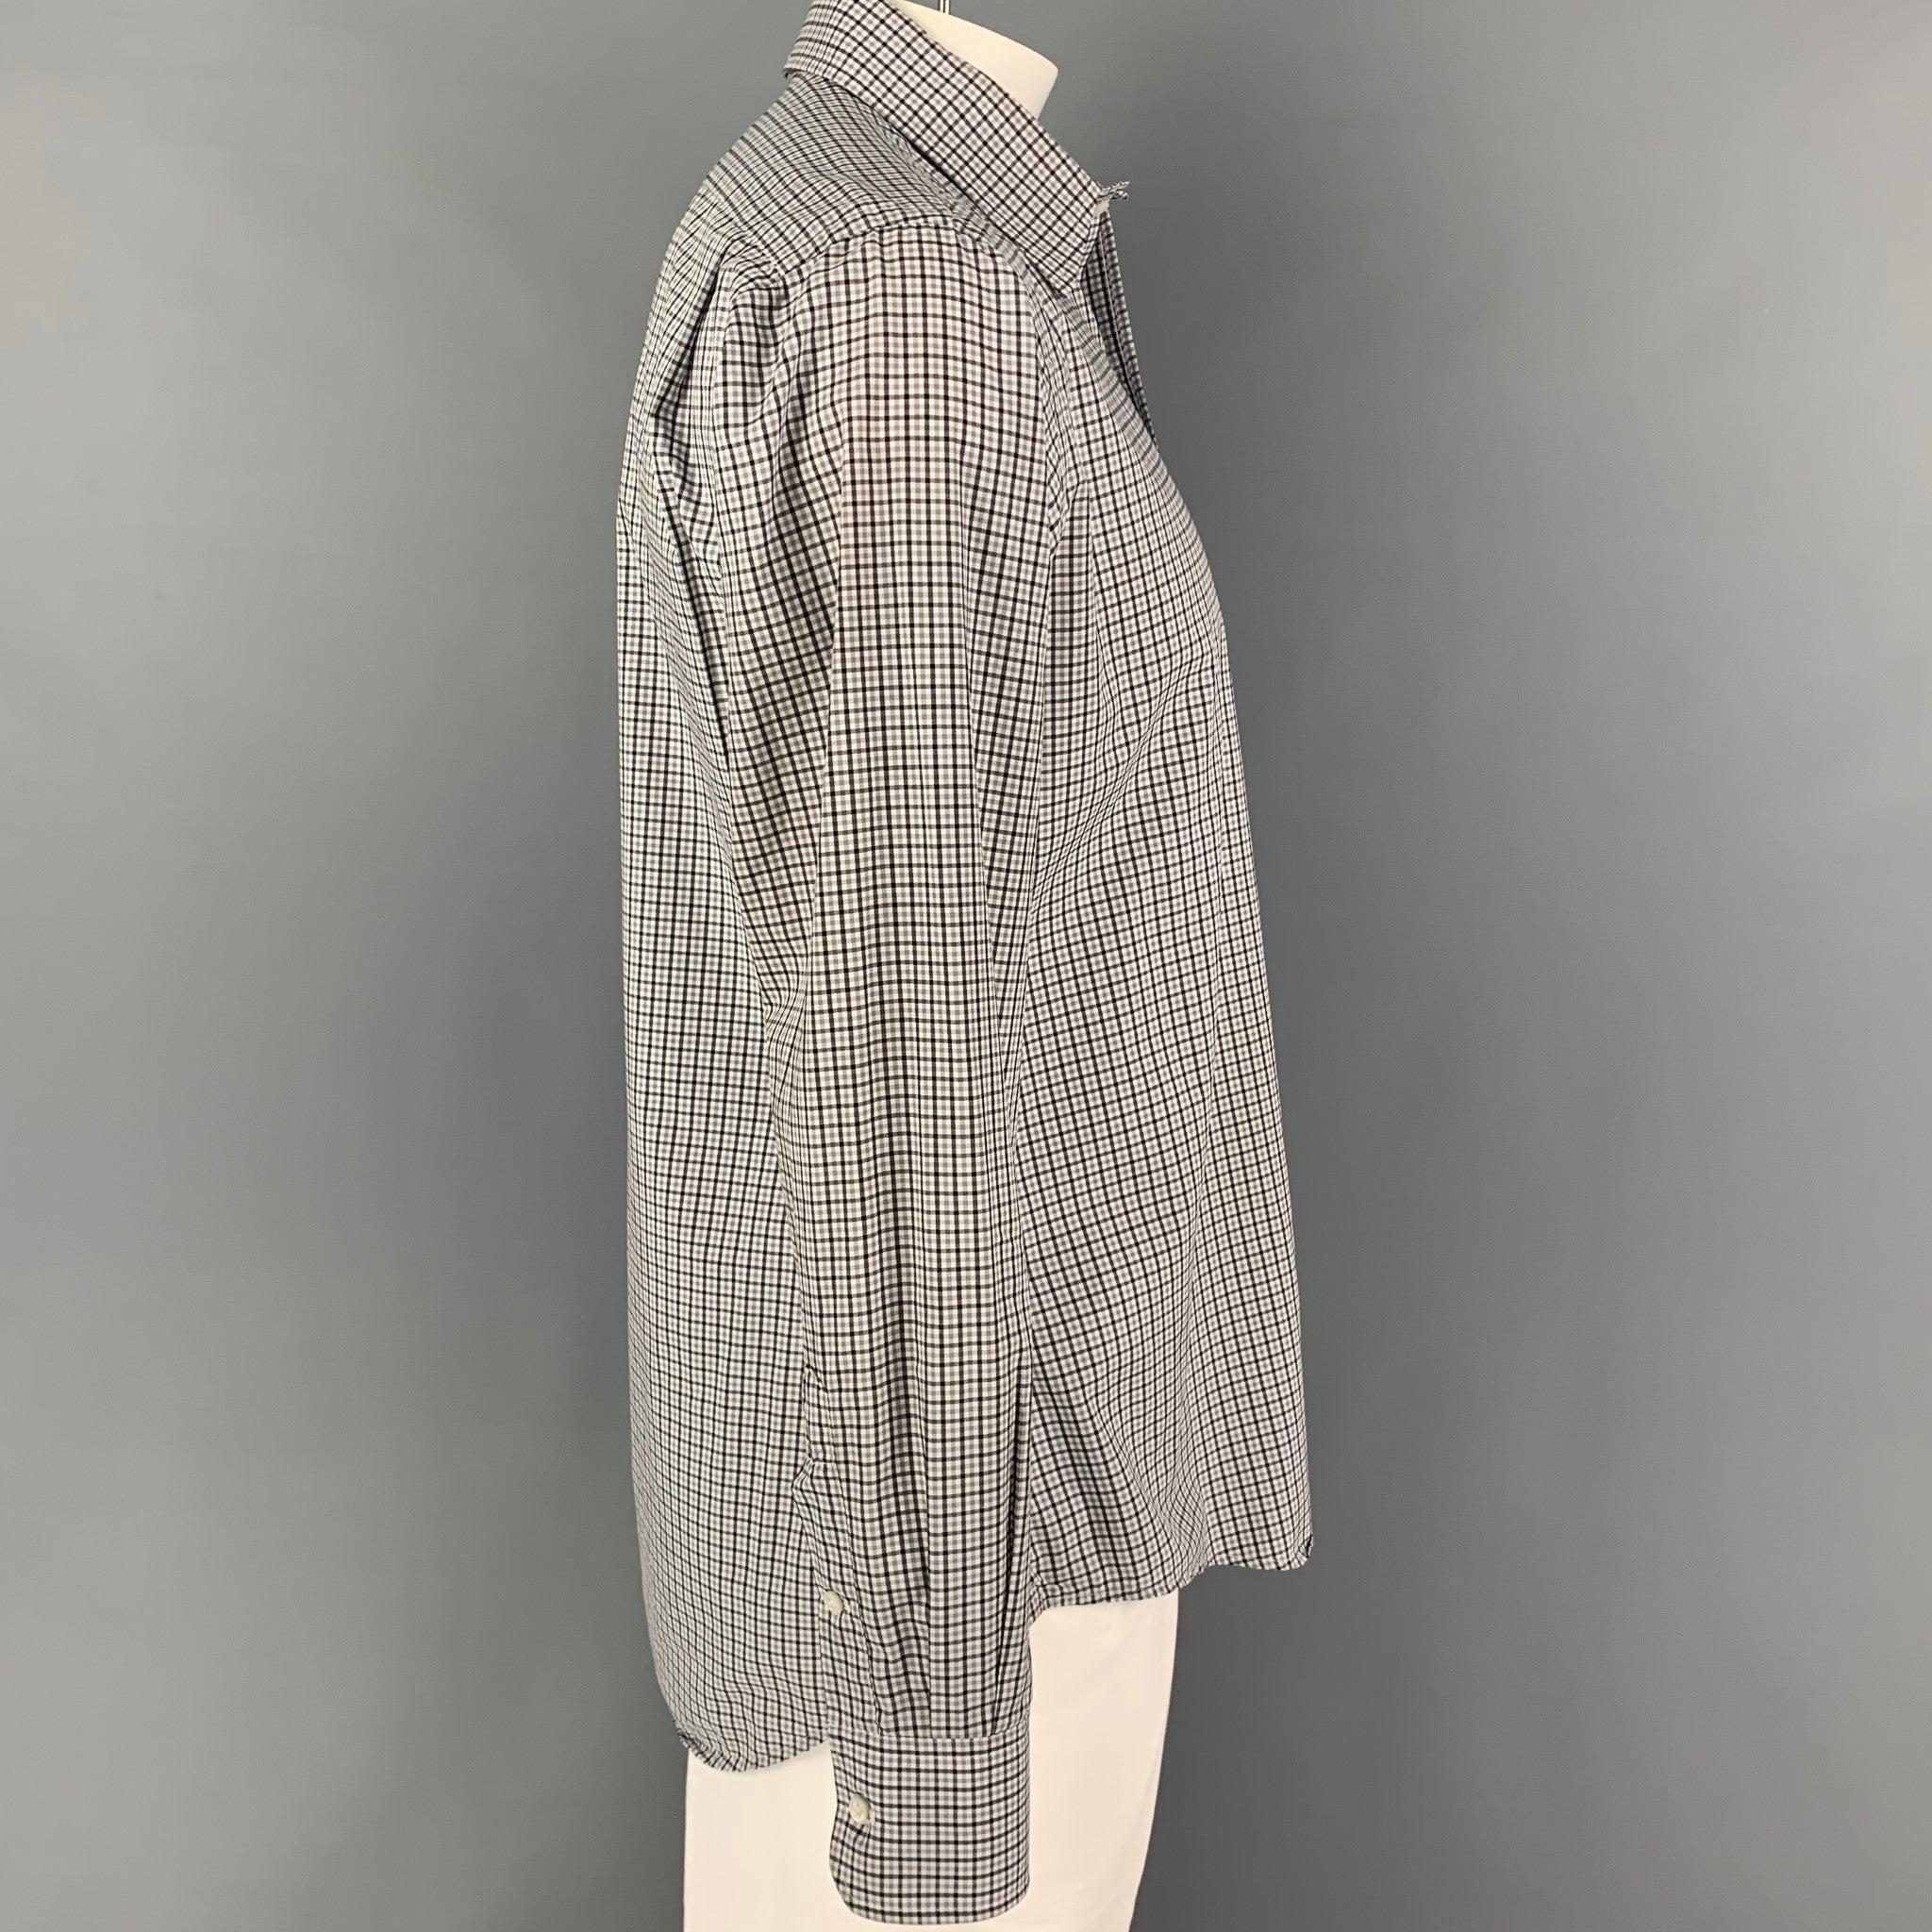 THOM BROWNE Spring 2009 long sleeve shirt comes in a white & black plaid cotton featuring a pointed collar, patch pocket, and a button up closure.
Very Good
Pre-Owned Condition. Light mark at sleeve. As-is.  

Marked:   5 

Measurements: 
